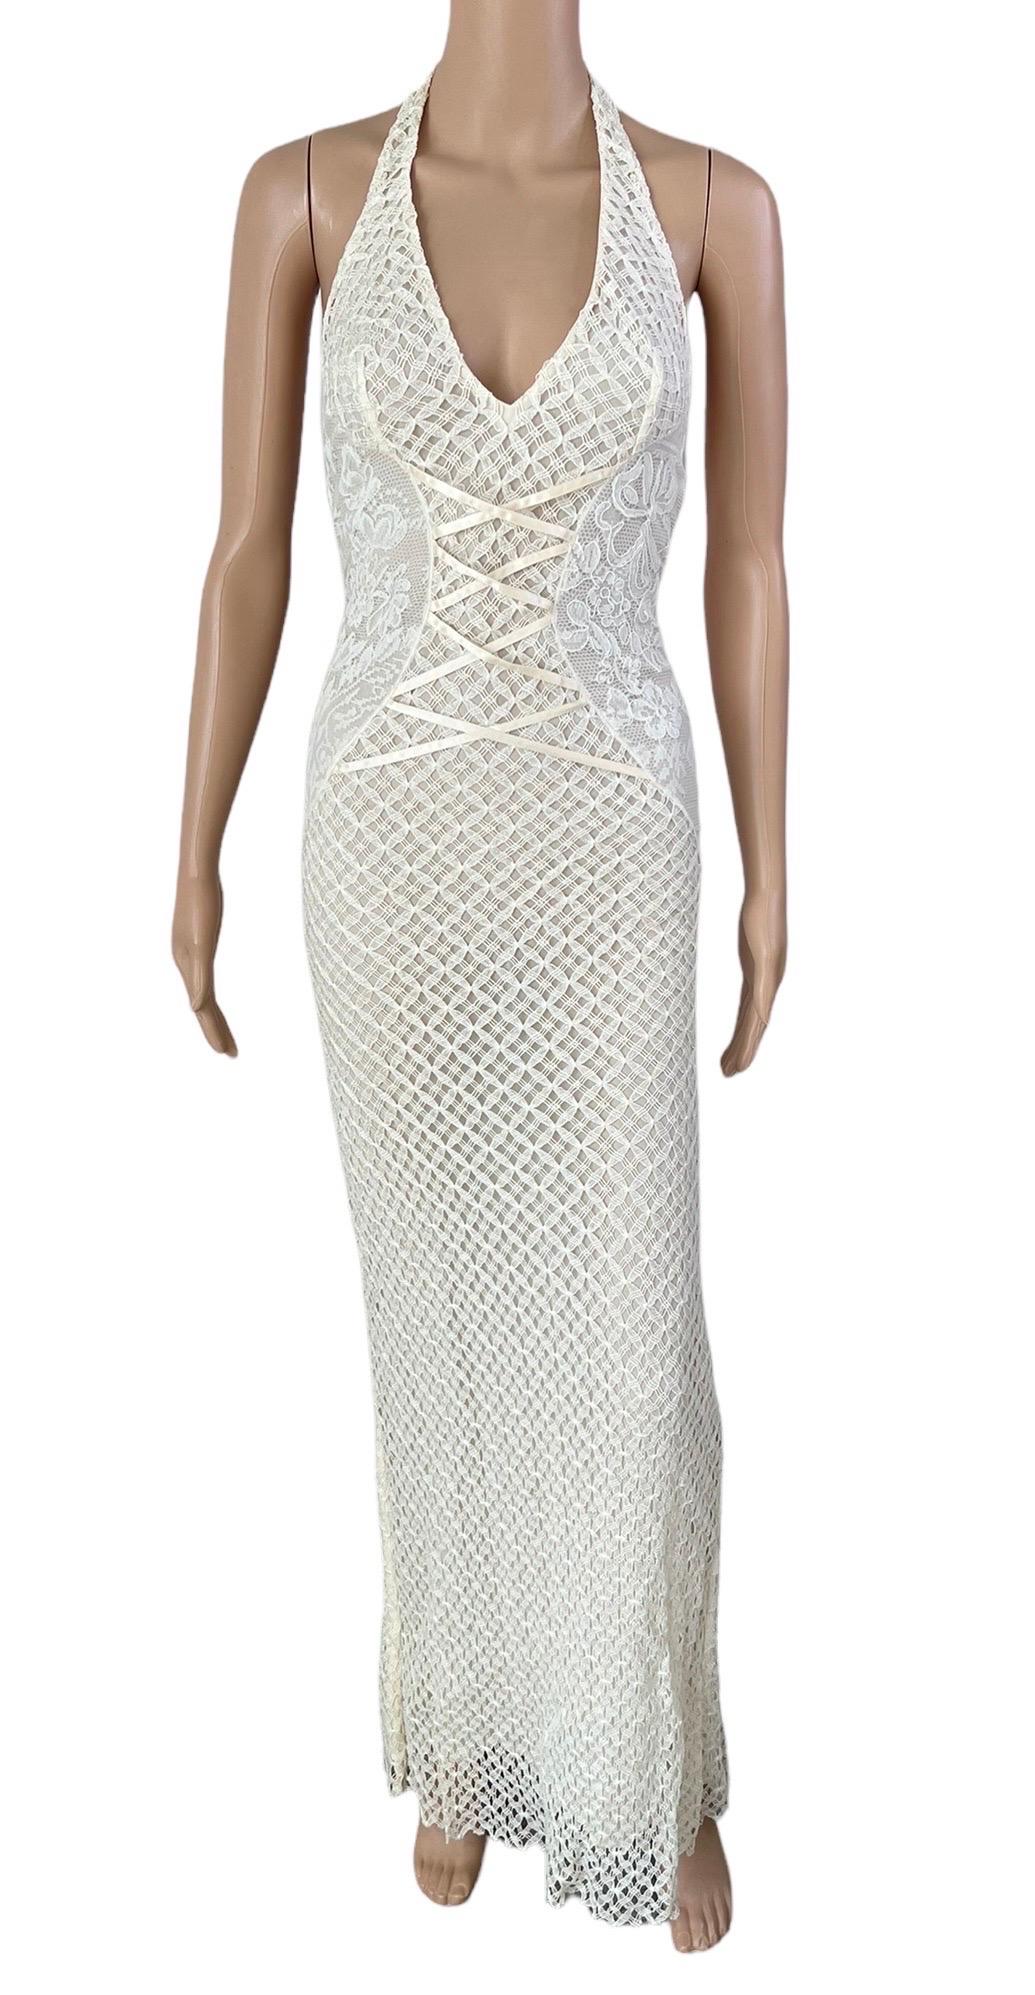 Gianni Versace S/S 2002 Plunging Backless Semi Sheer Lace Knit Ivory Dress Gown 5